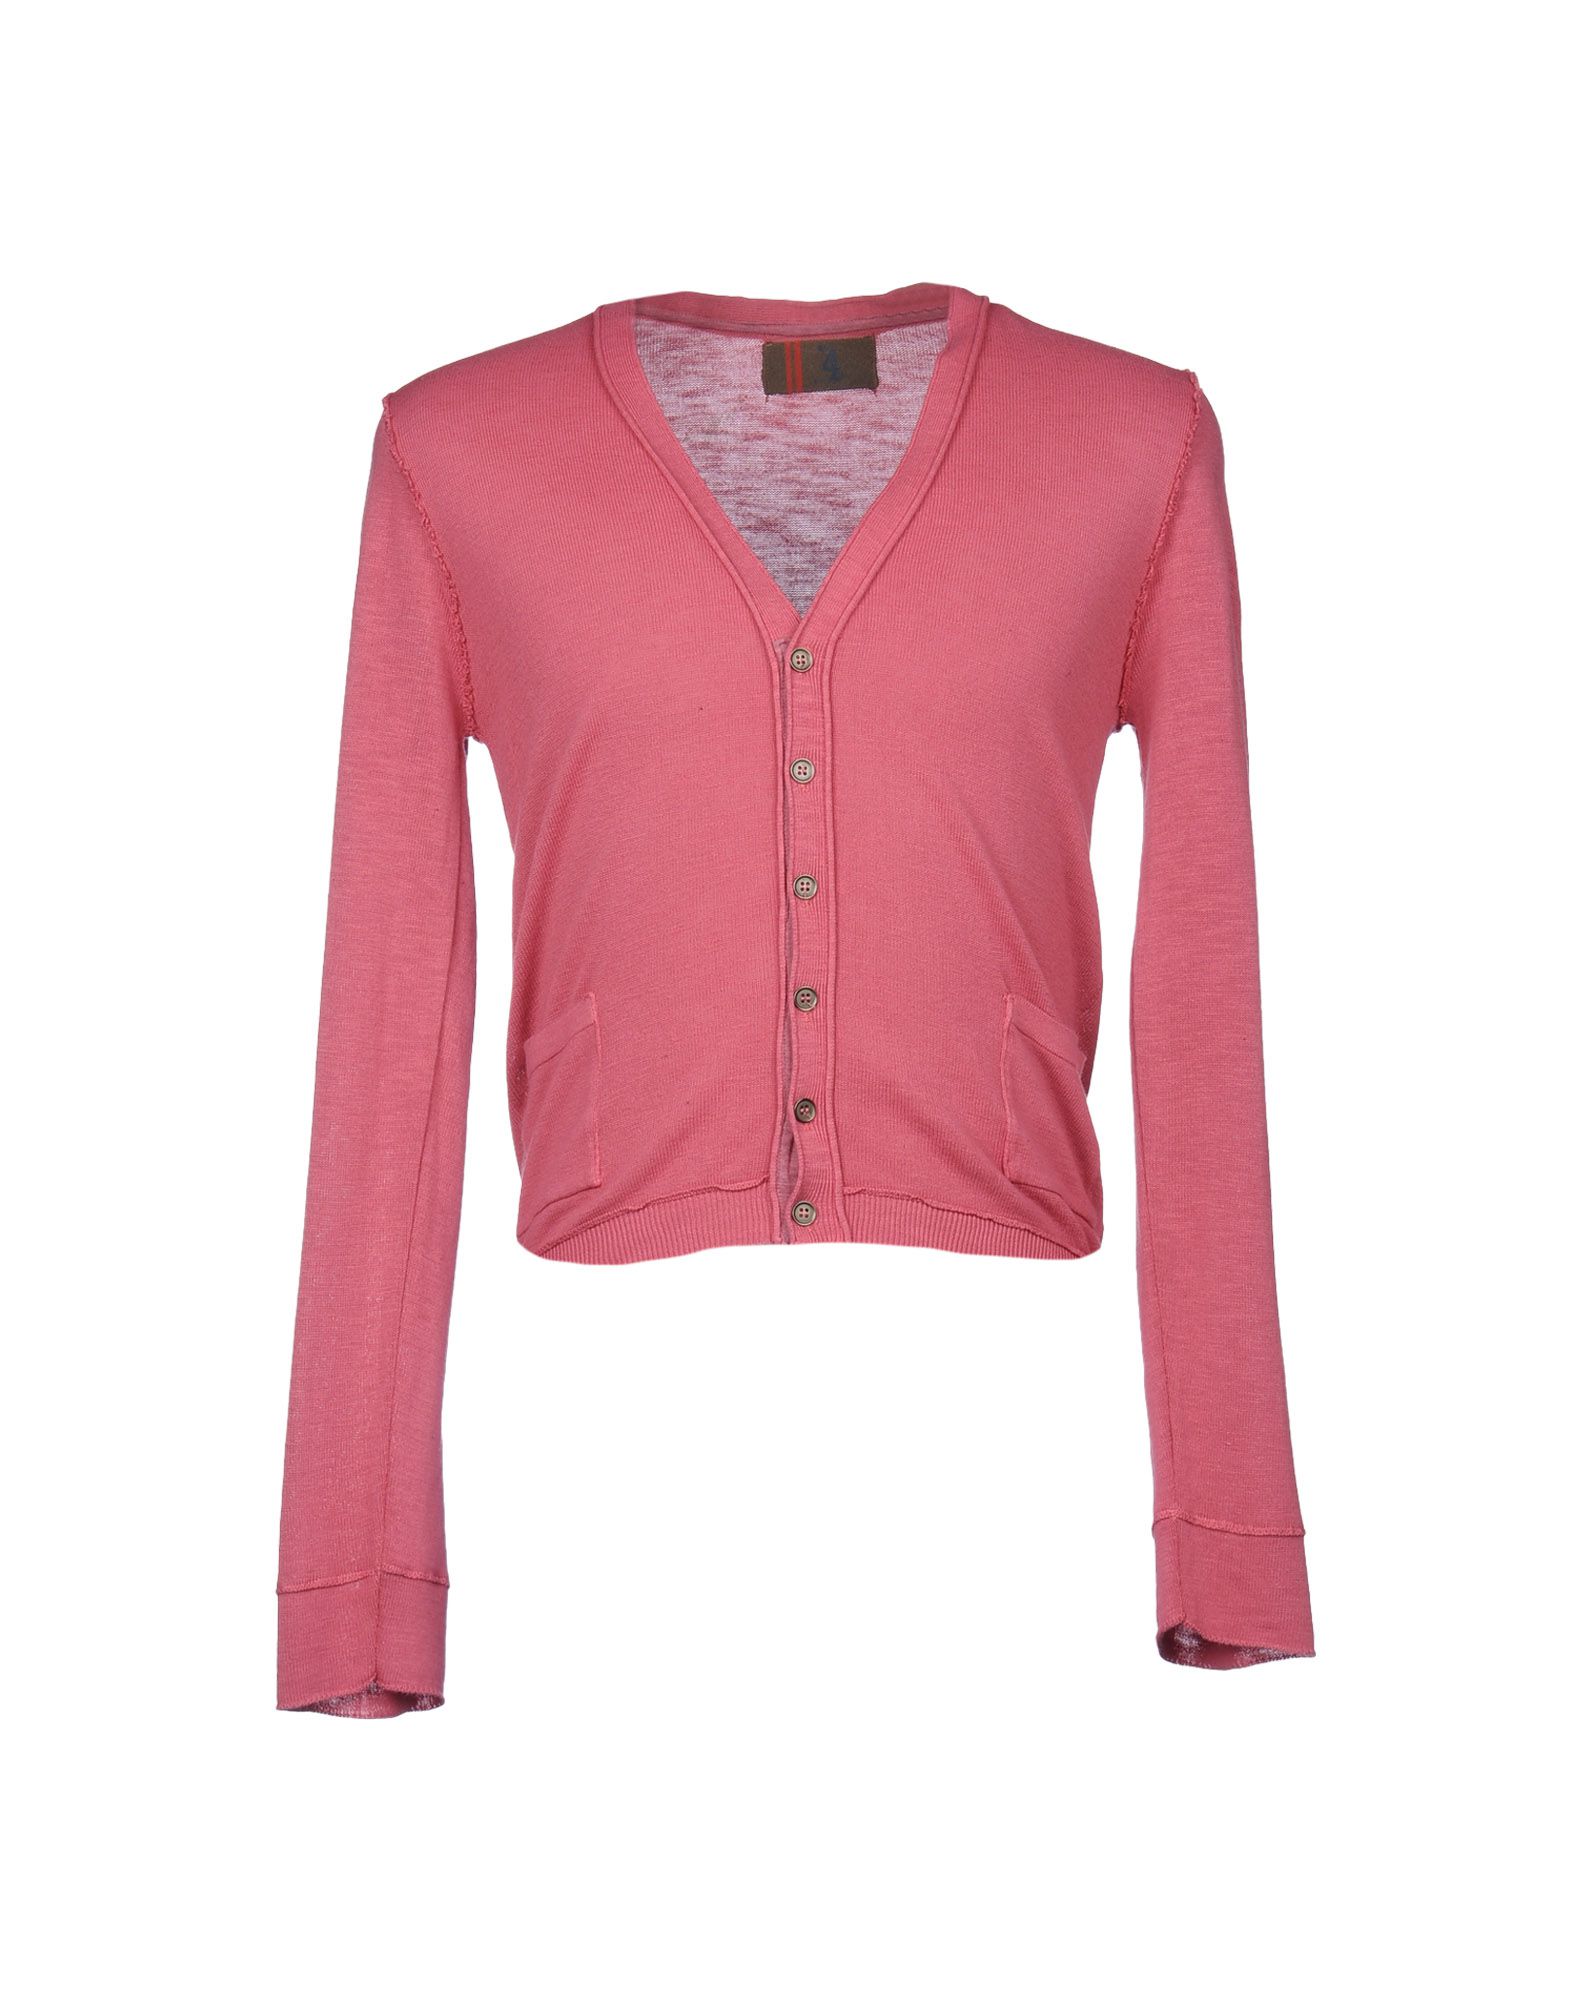 Lyst - 4 Four Messagerie Cardigan in Pink for Men